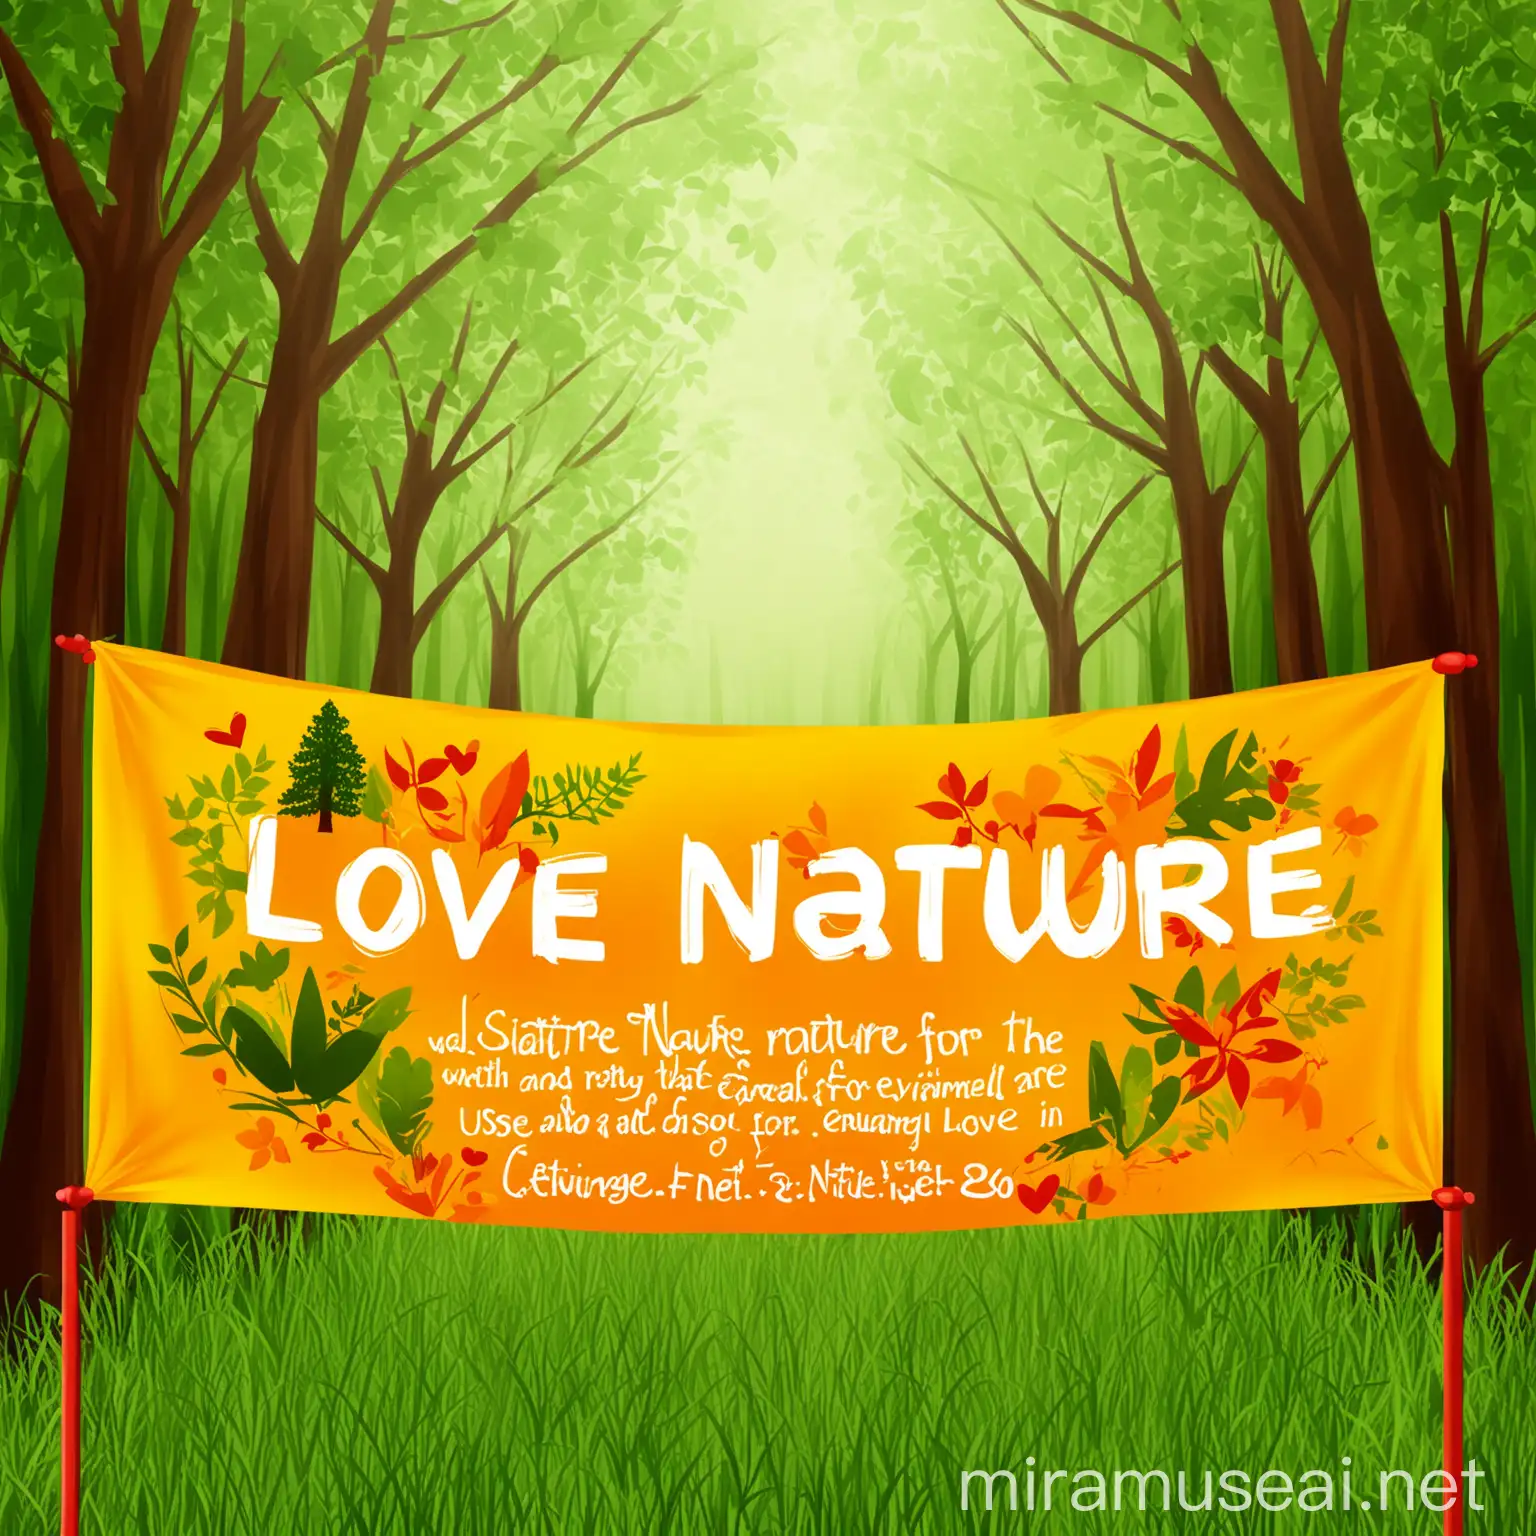 Design a banner for me that shows love for nature and the environment. Design as simple and with few details as possible. Use warm colors such as red, yellow and orange in the design

#fbb25e
#b22ac
#e09a03
